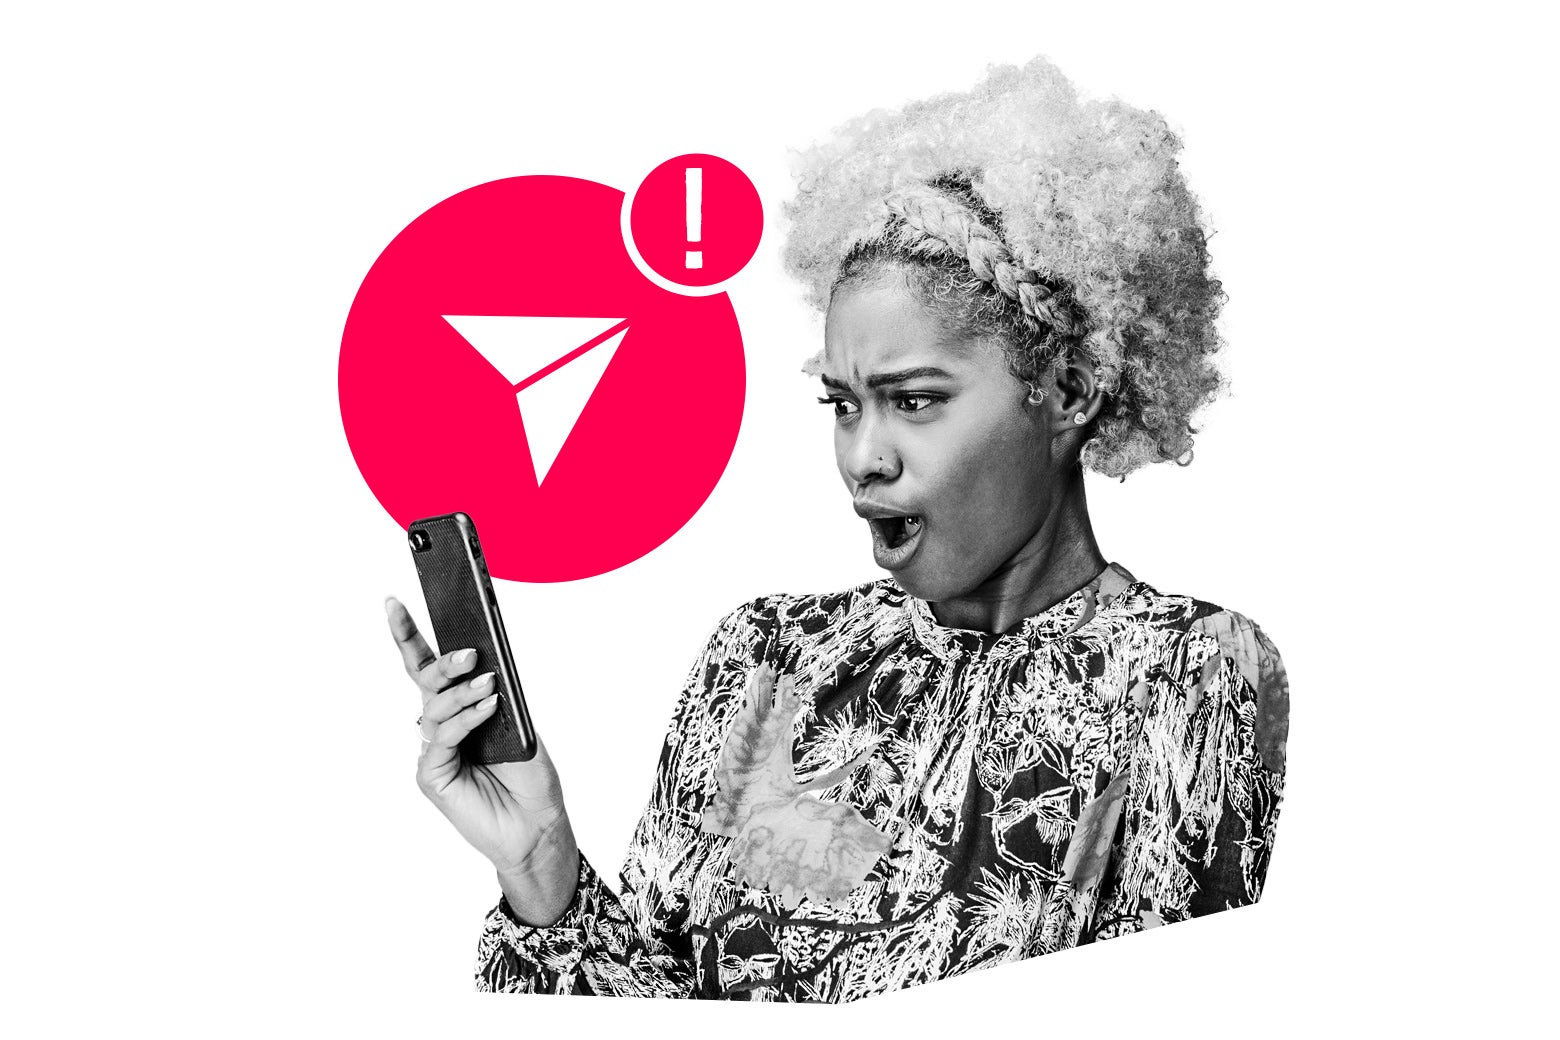 A woman looks at her phone with a shocked expression. An illustrated "send" icon and exclamation point appear behind her head.